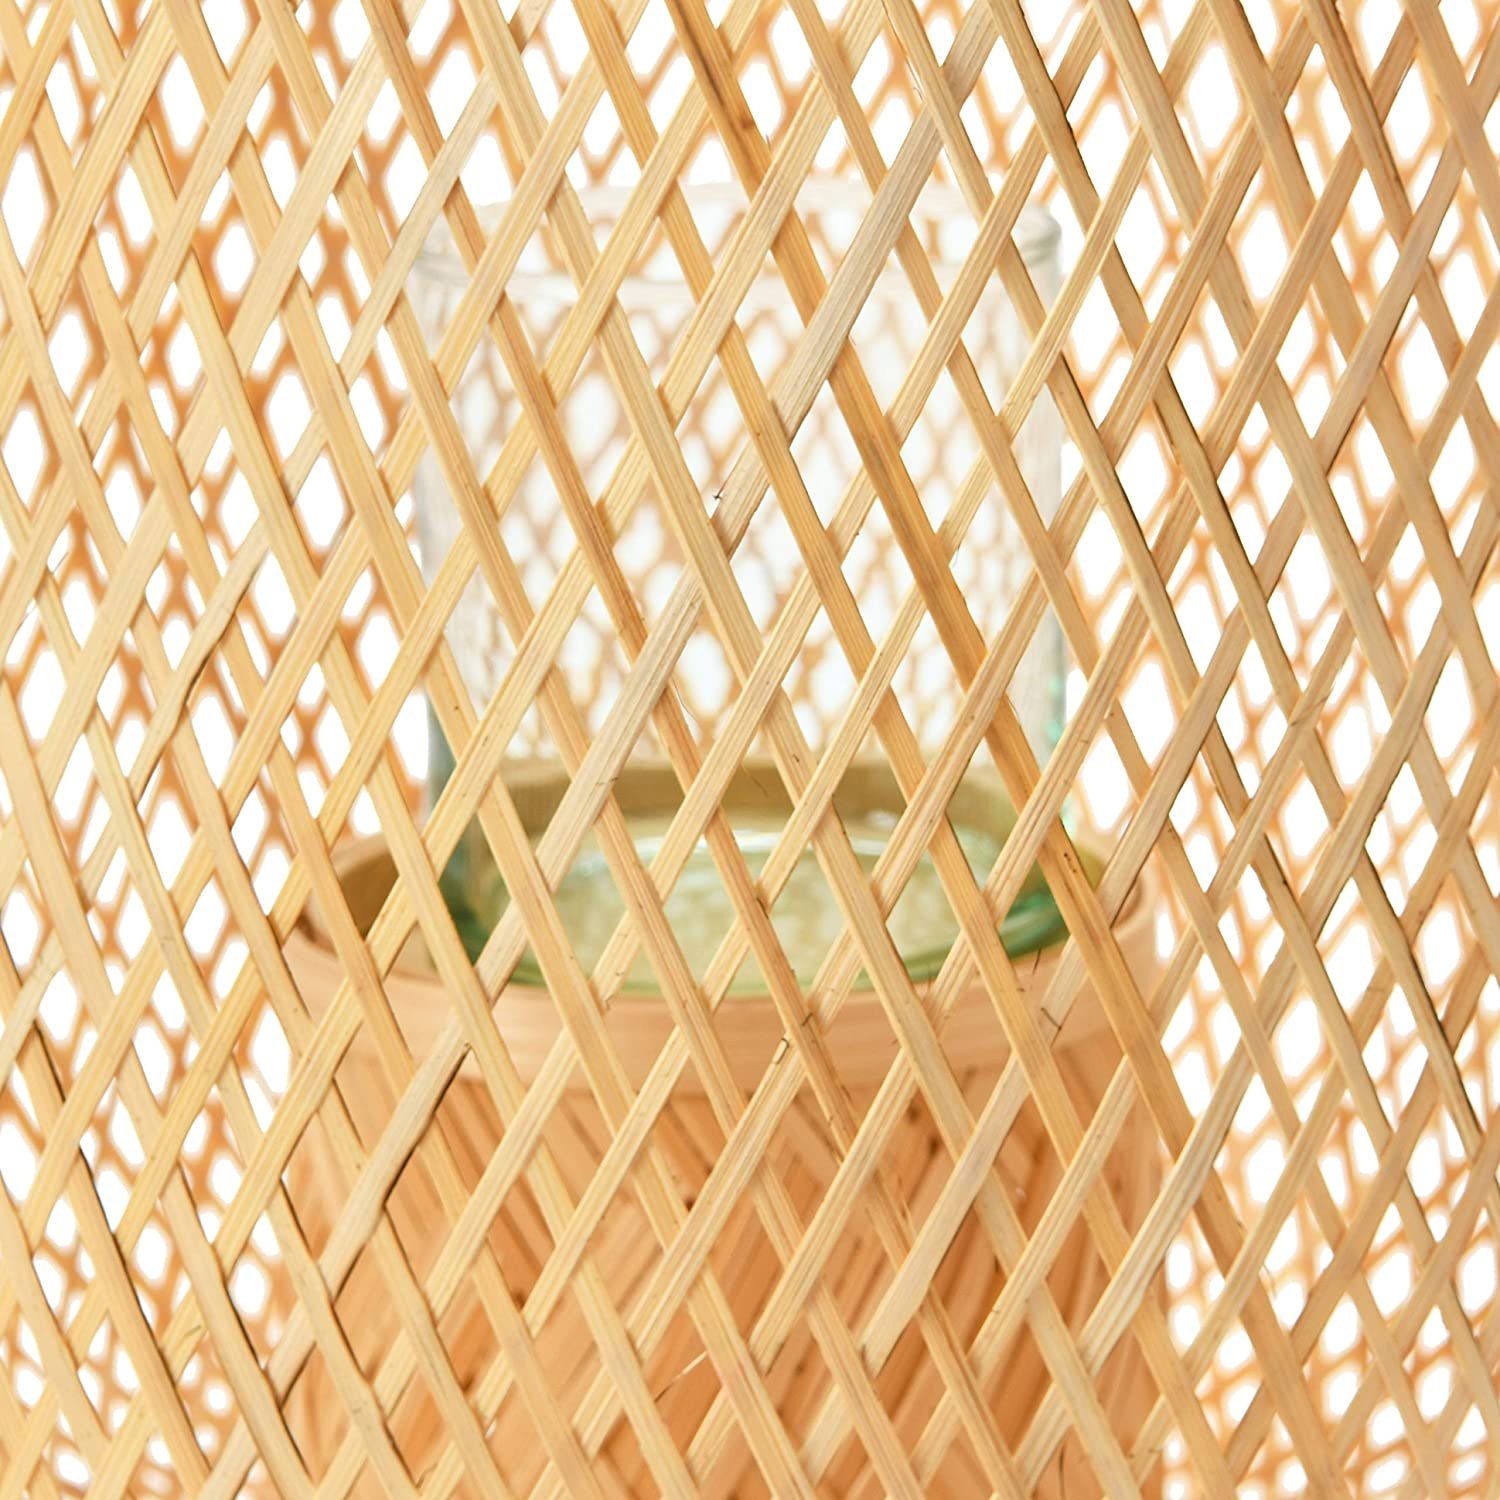 Handwoven Bamboo Lantern with Jute Handle & Glass Insert, Natural, Tall - Image 3